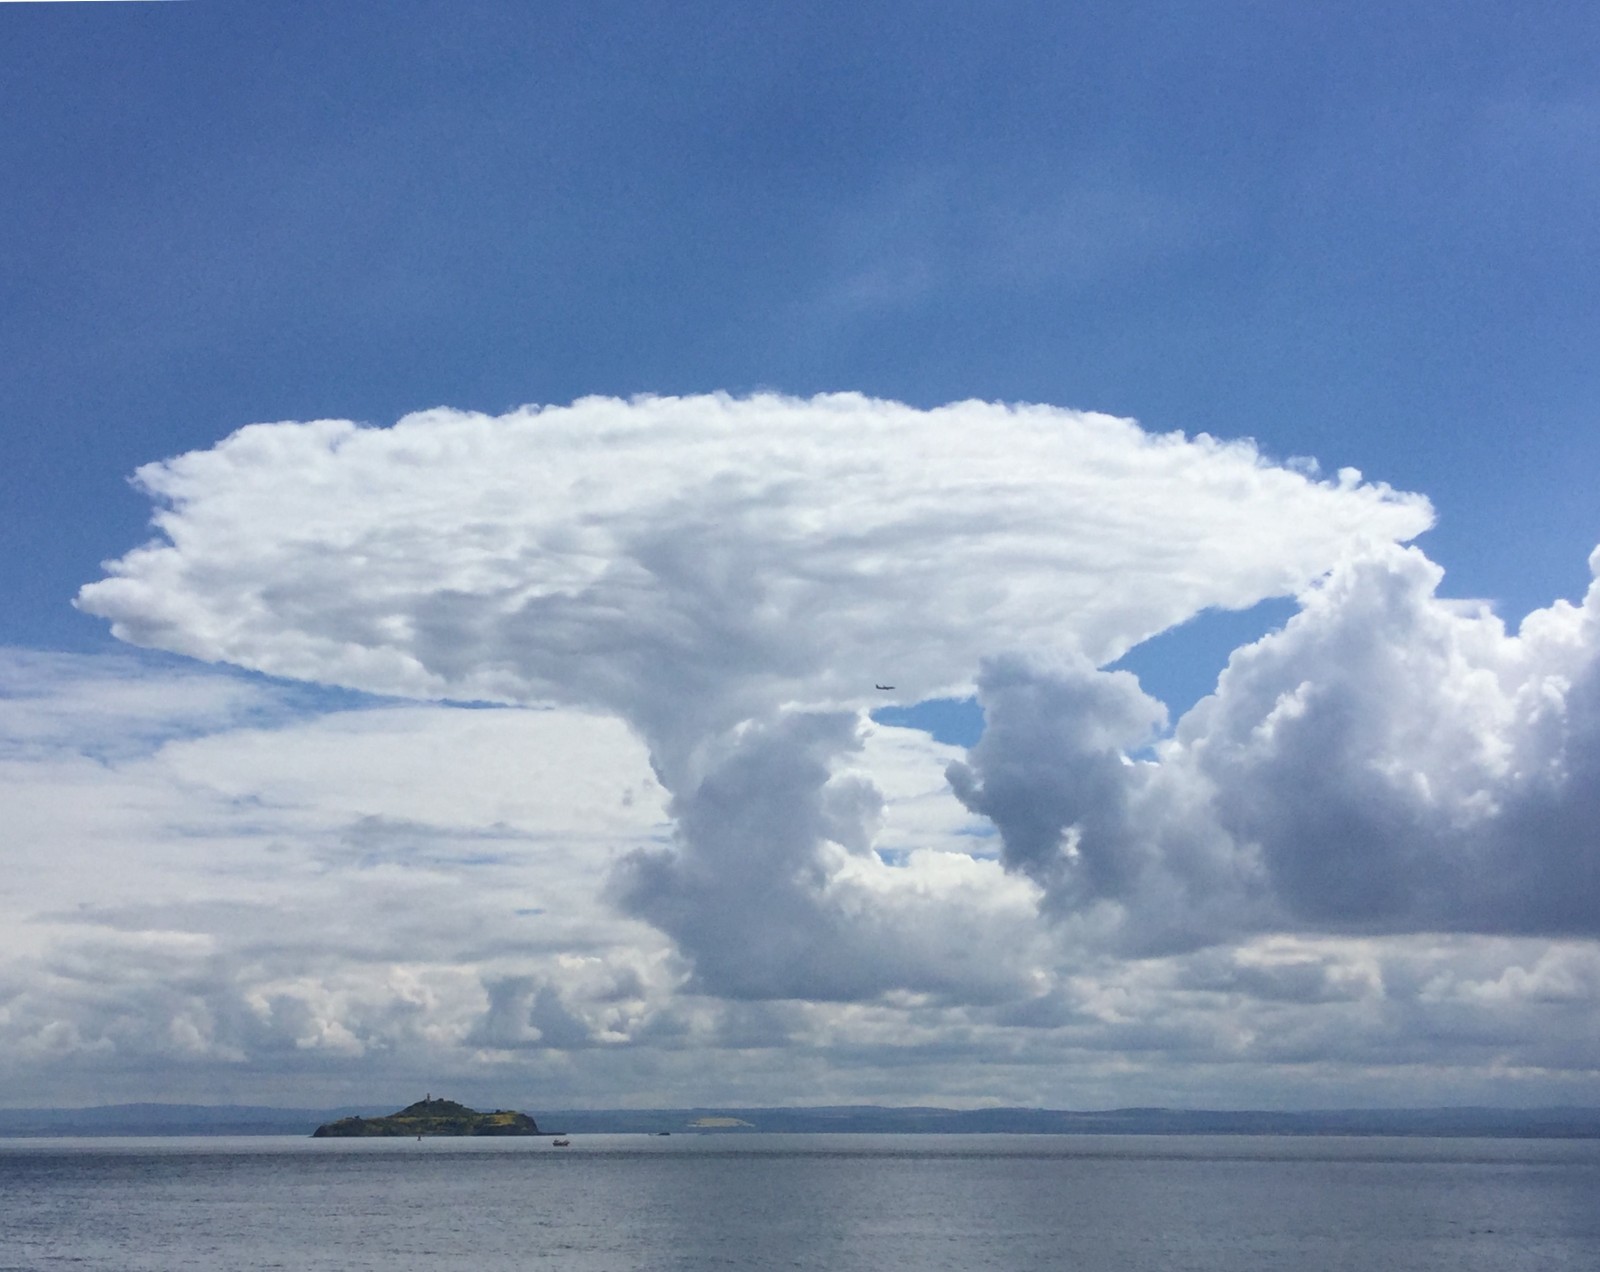 Anvil cloud over the Forth.